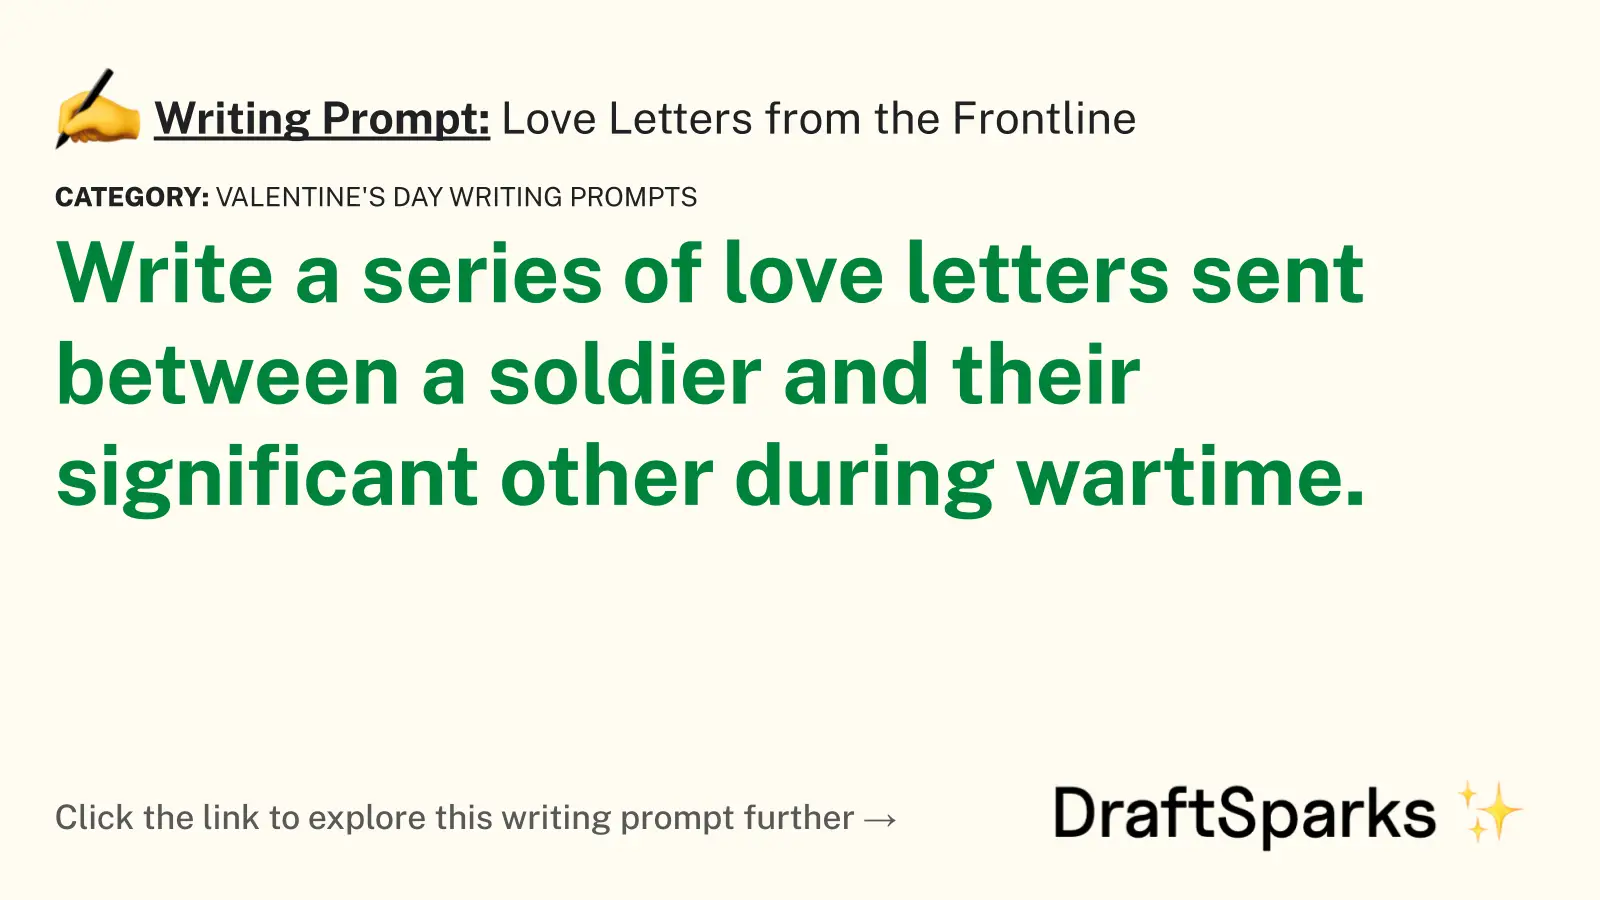 Love Letters from the Frontline